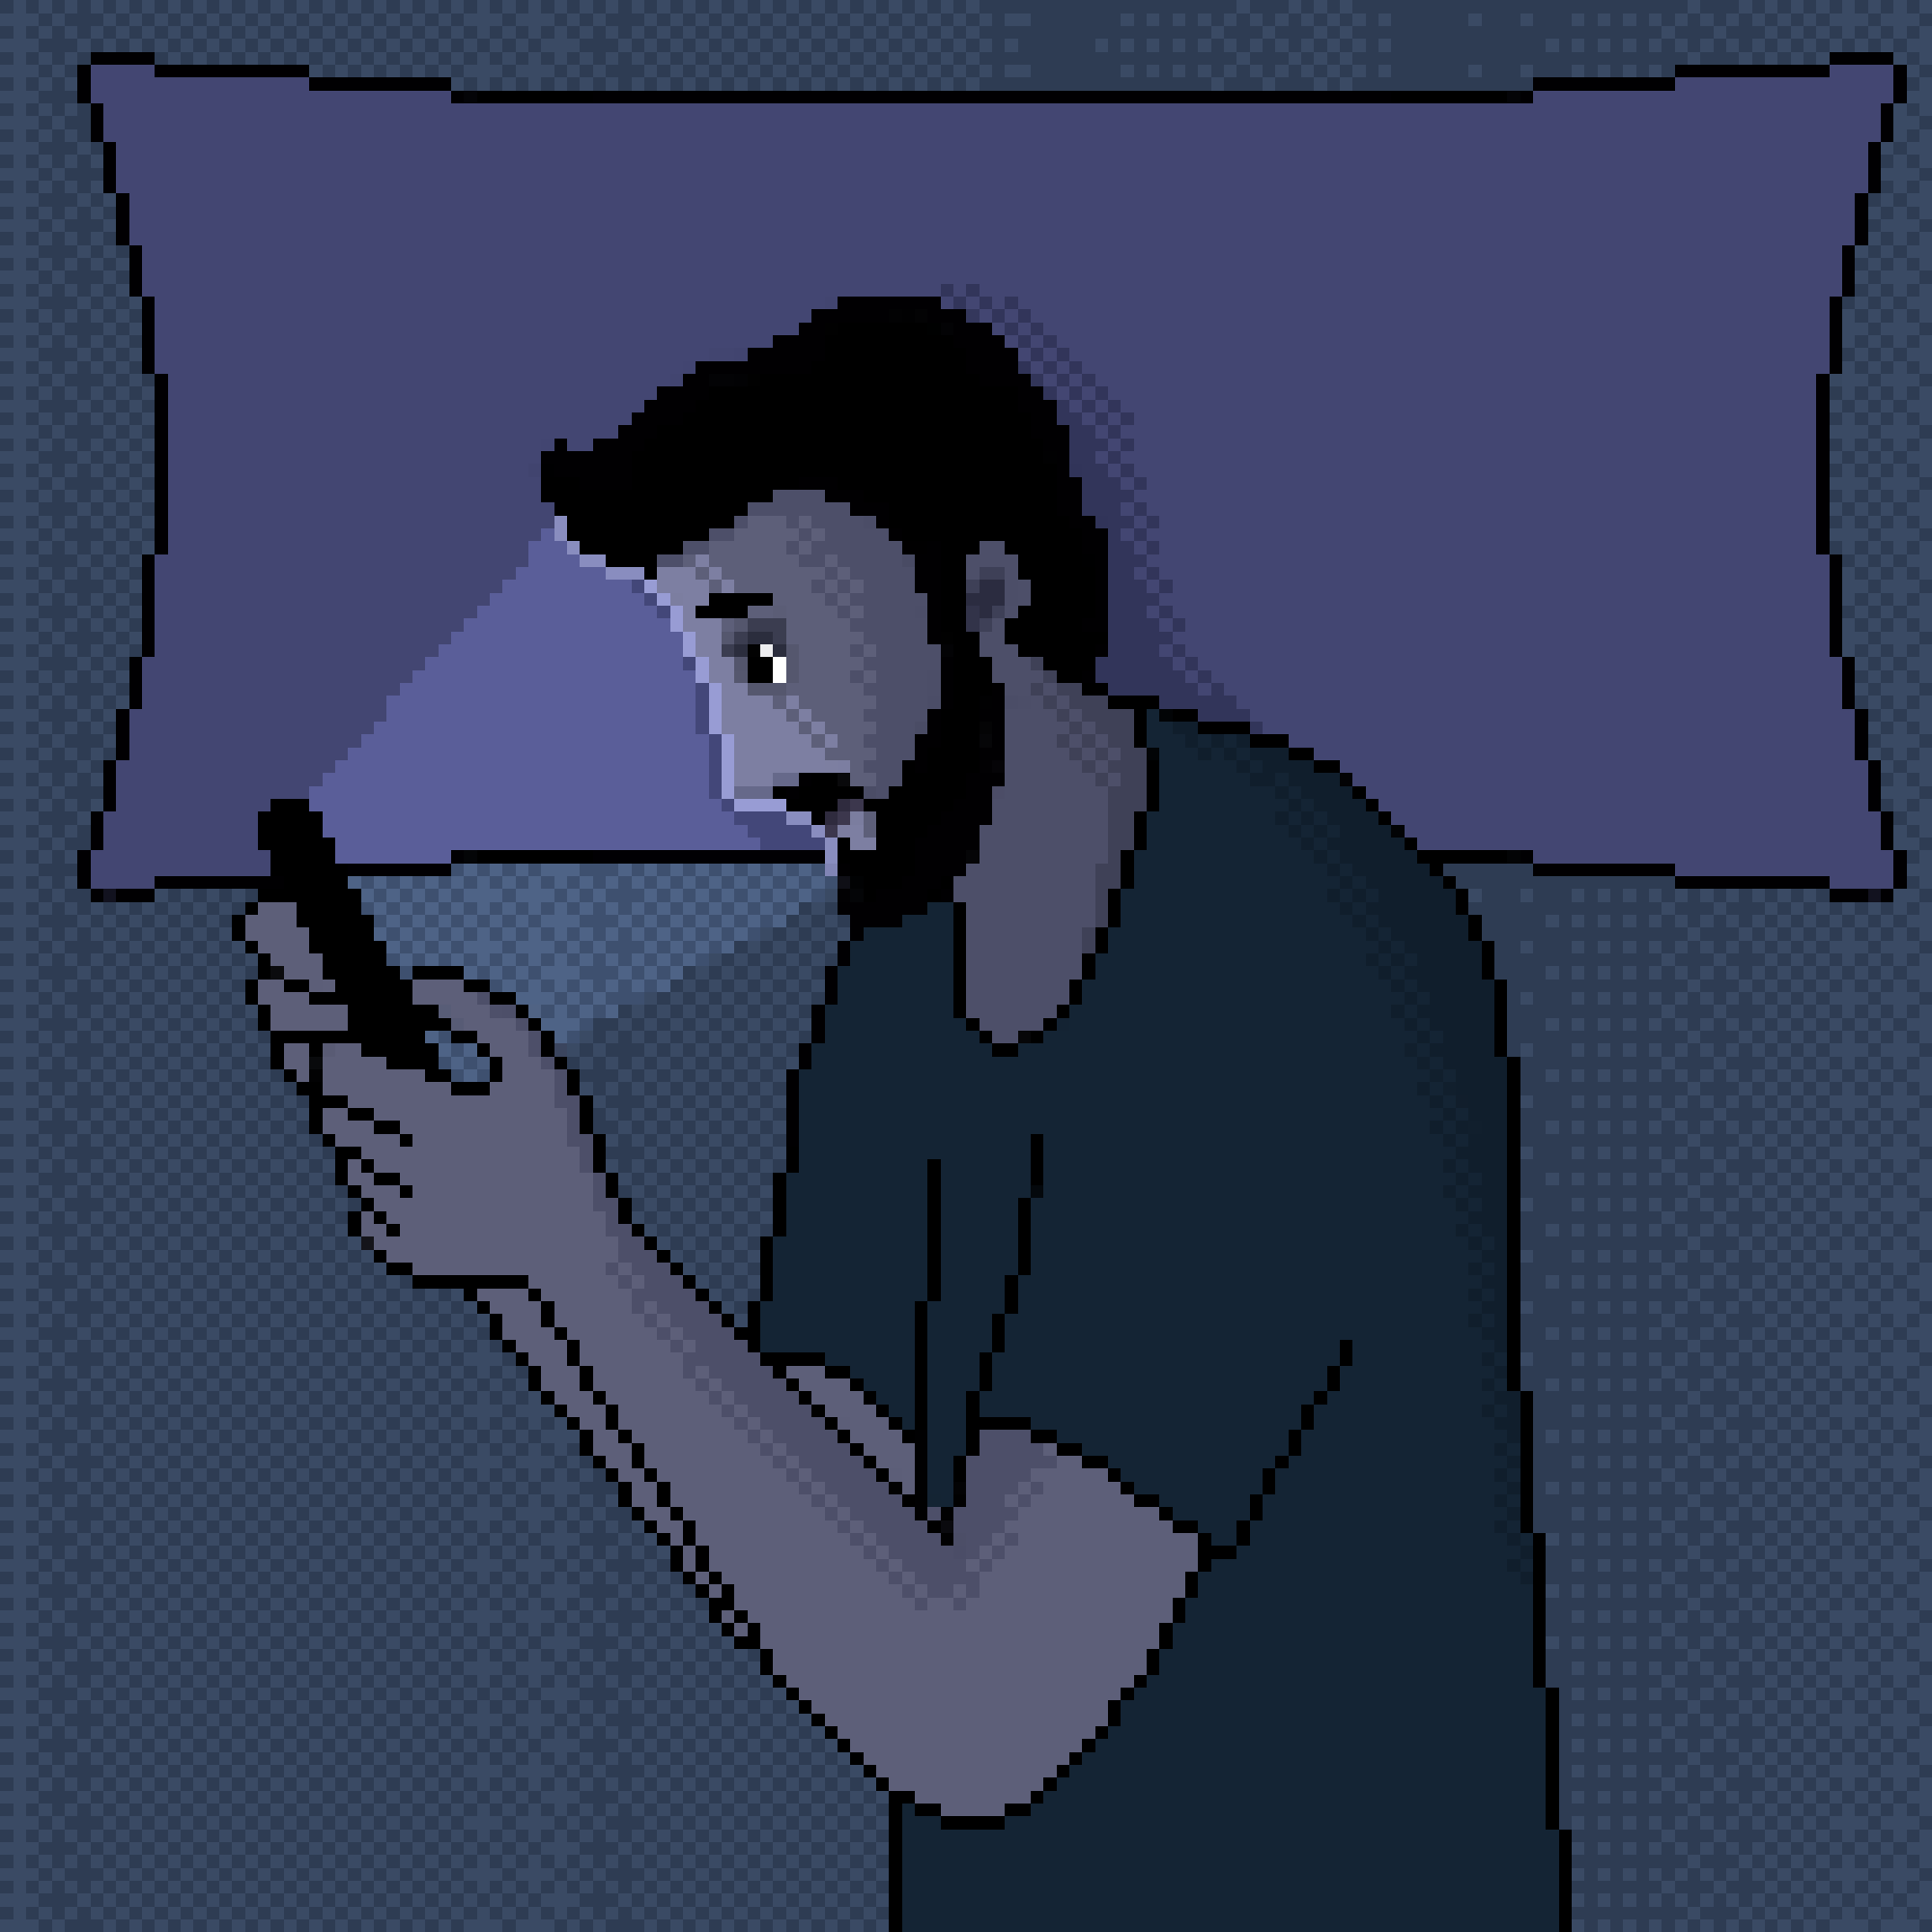 Scrolling before bed